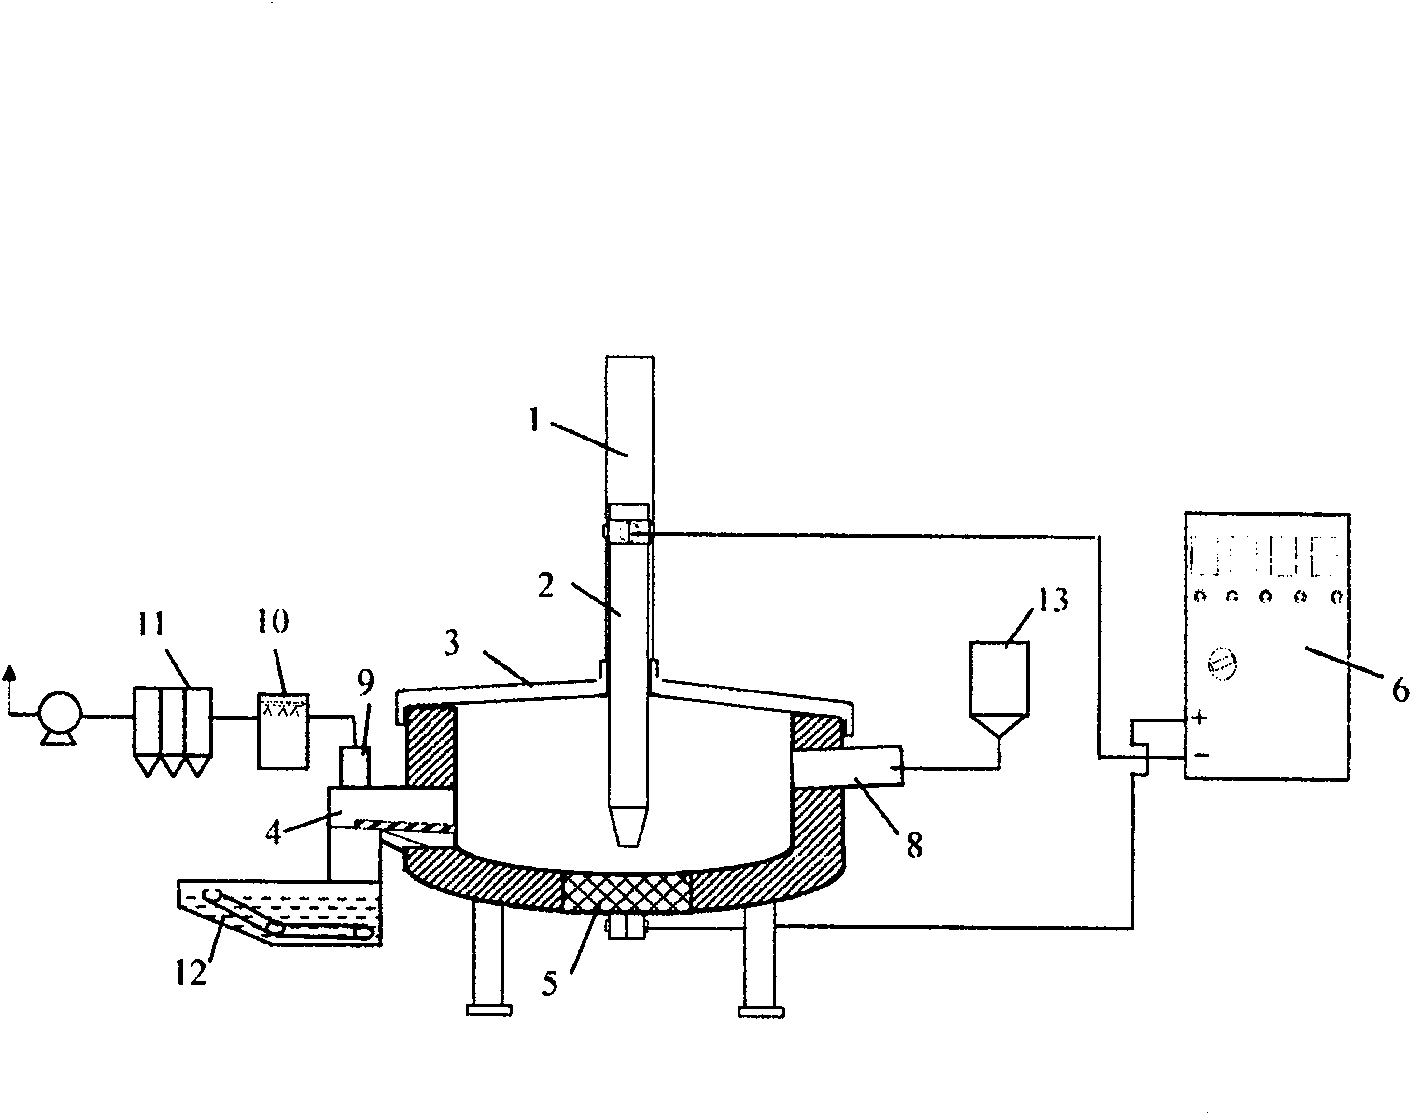 Electric arc molten processing system and method for processing rubbish combustion ash